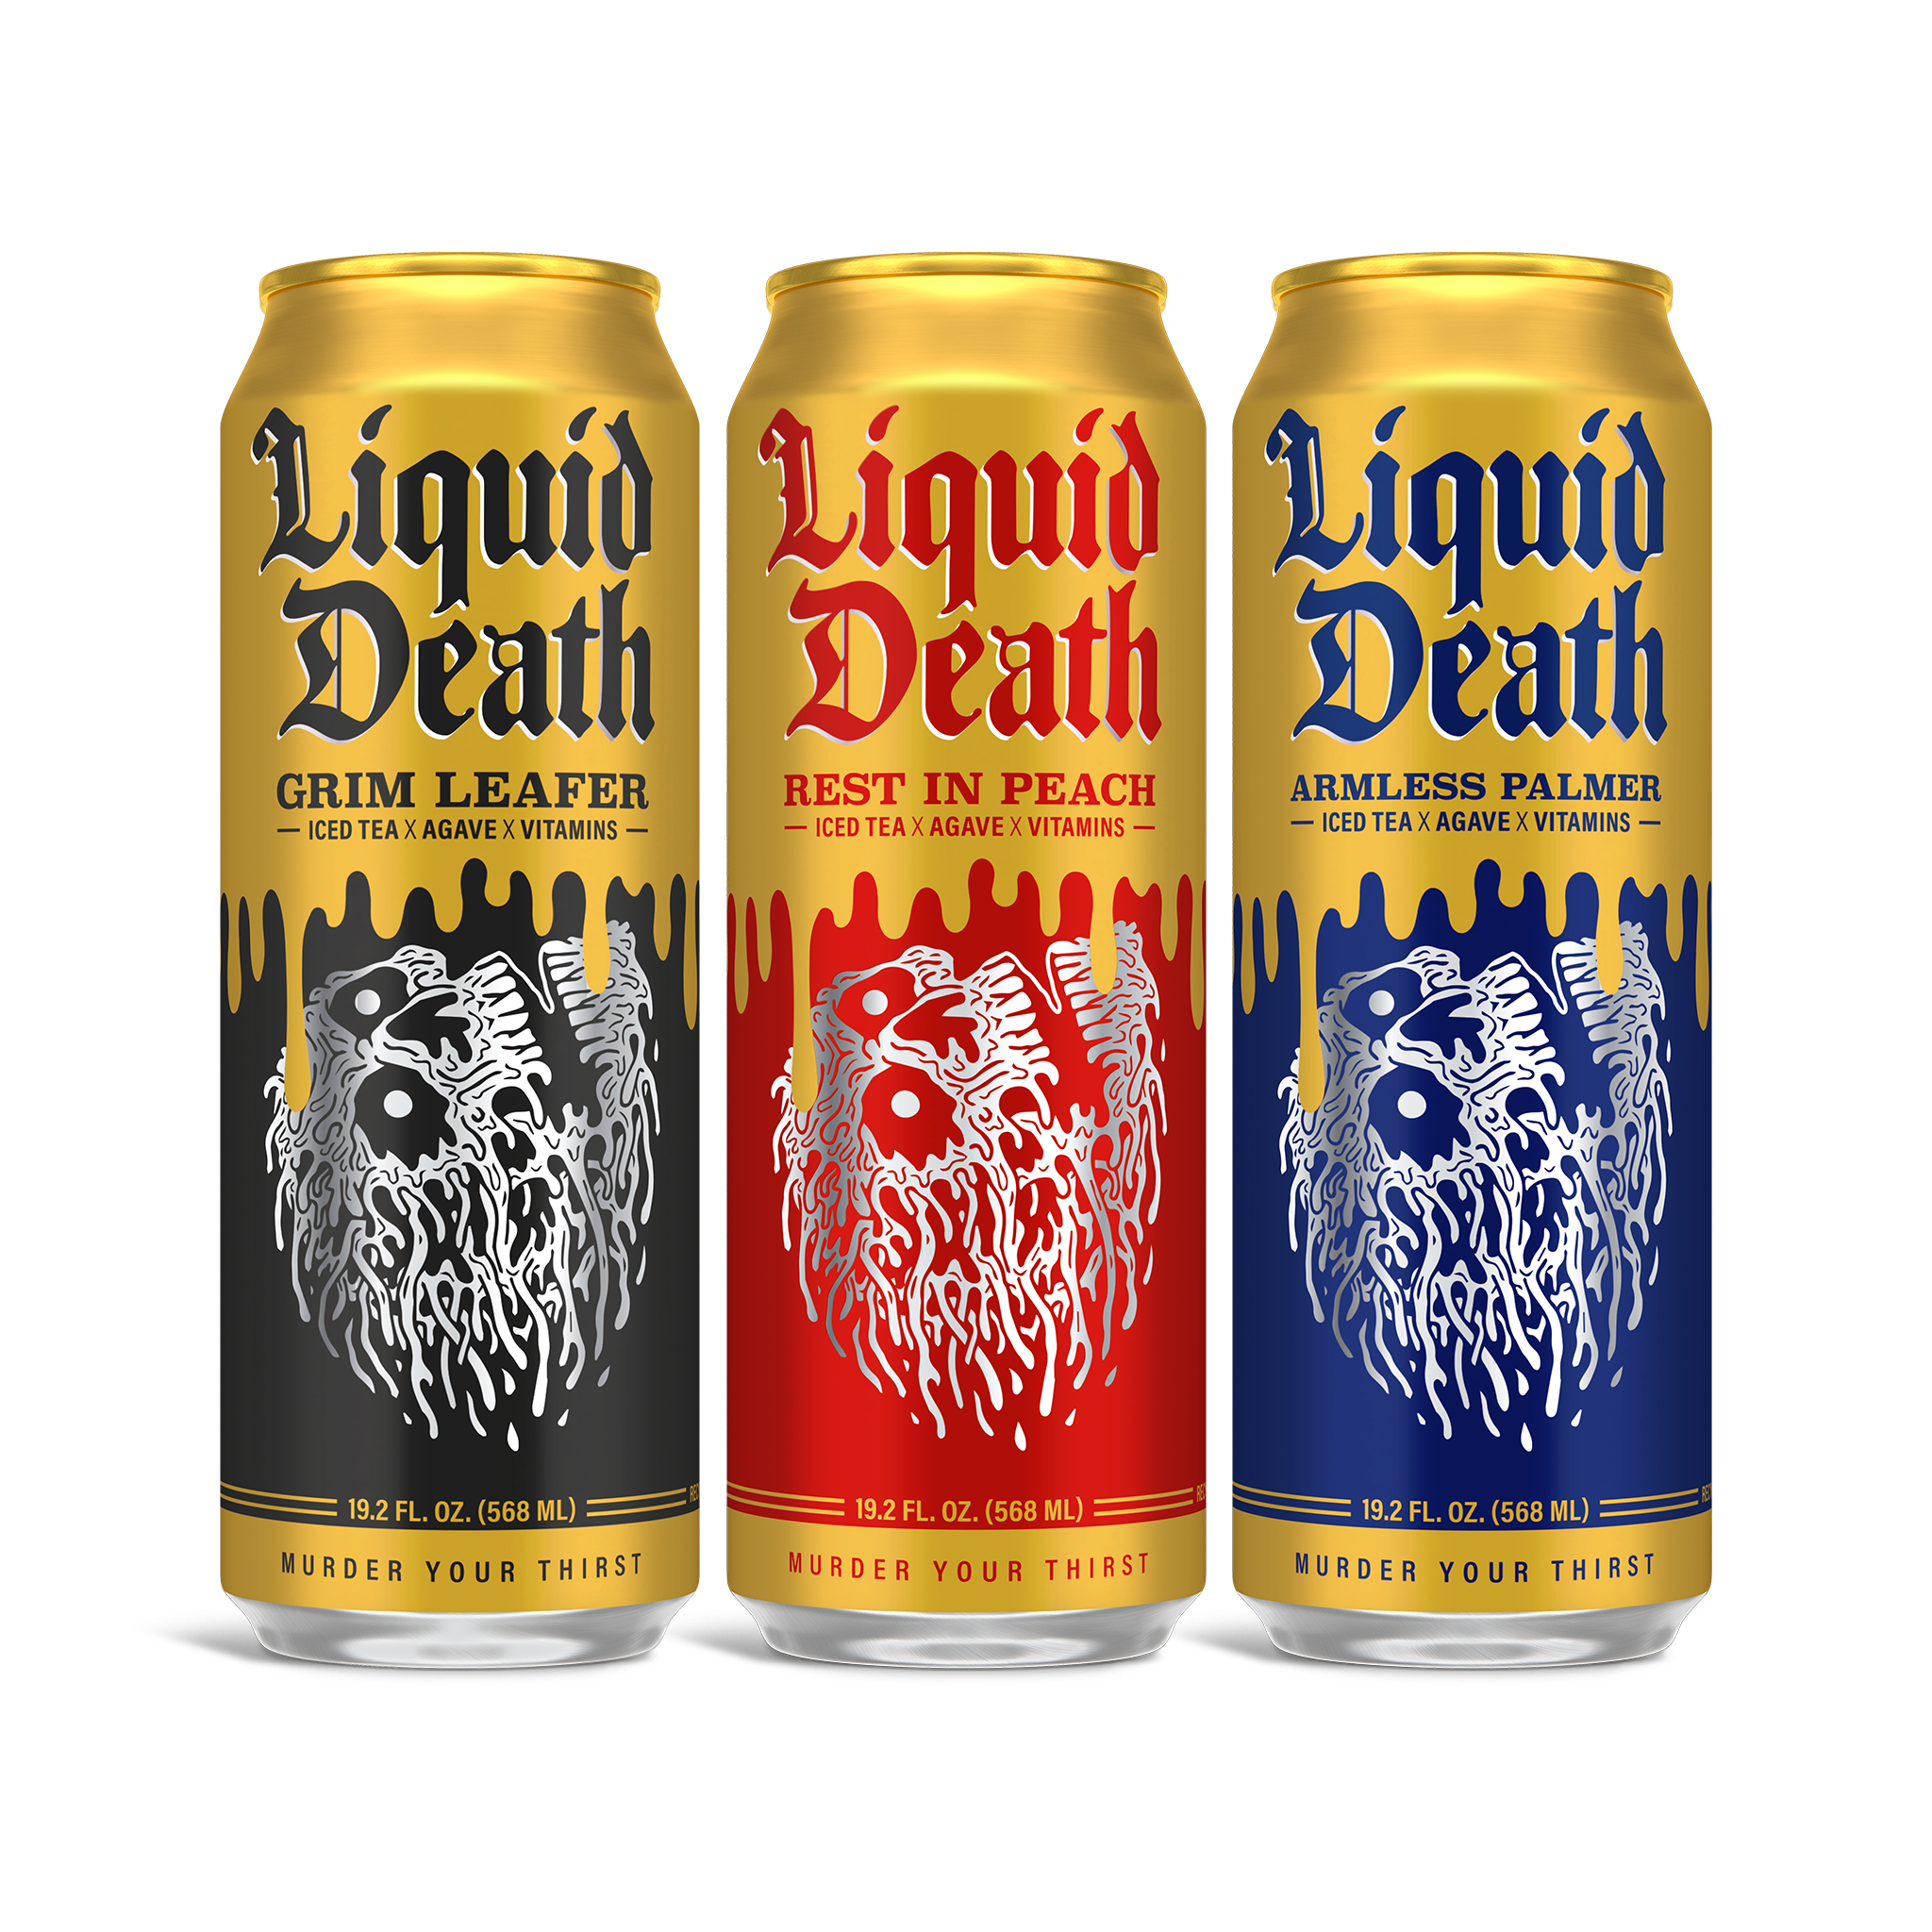 Three cans of Liquid Death iced tea in the flavors Grim Leafer, Rest in Peach, and Armless Palmer.